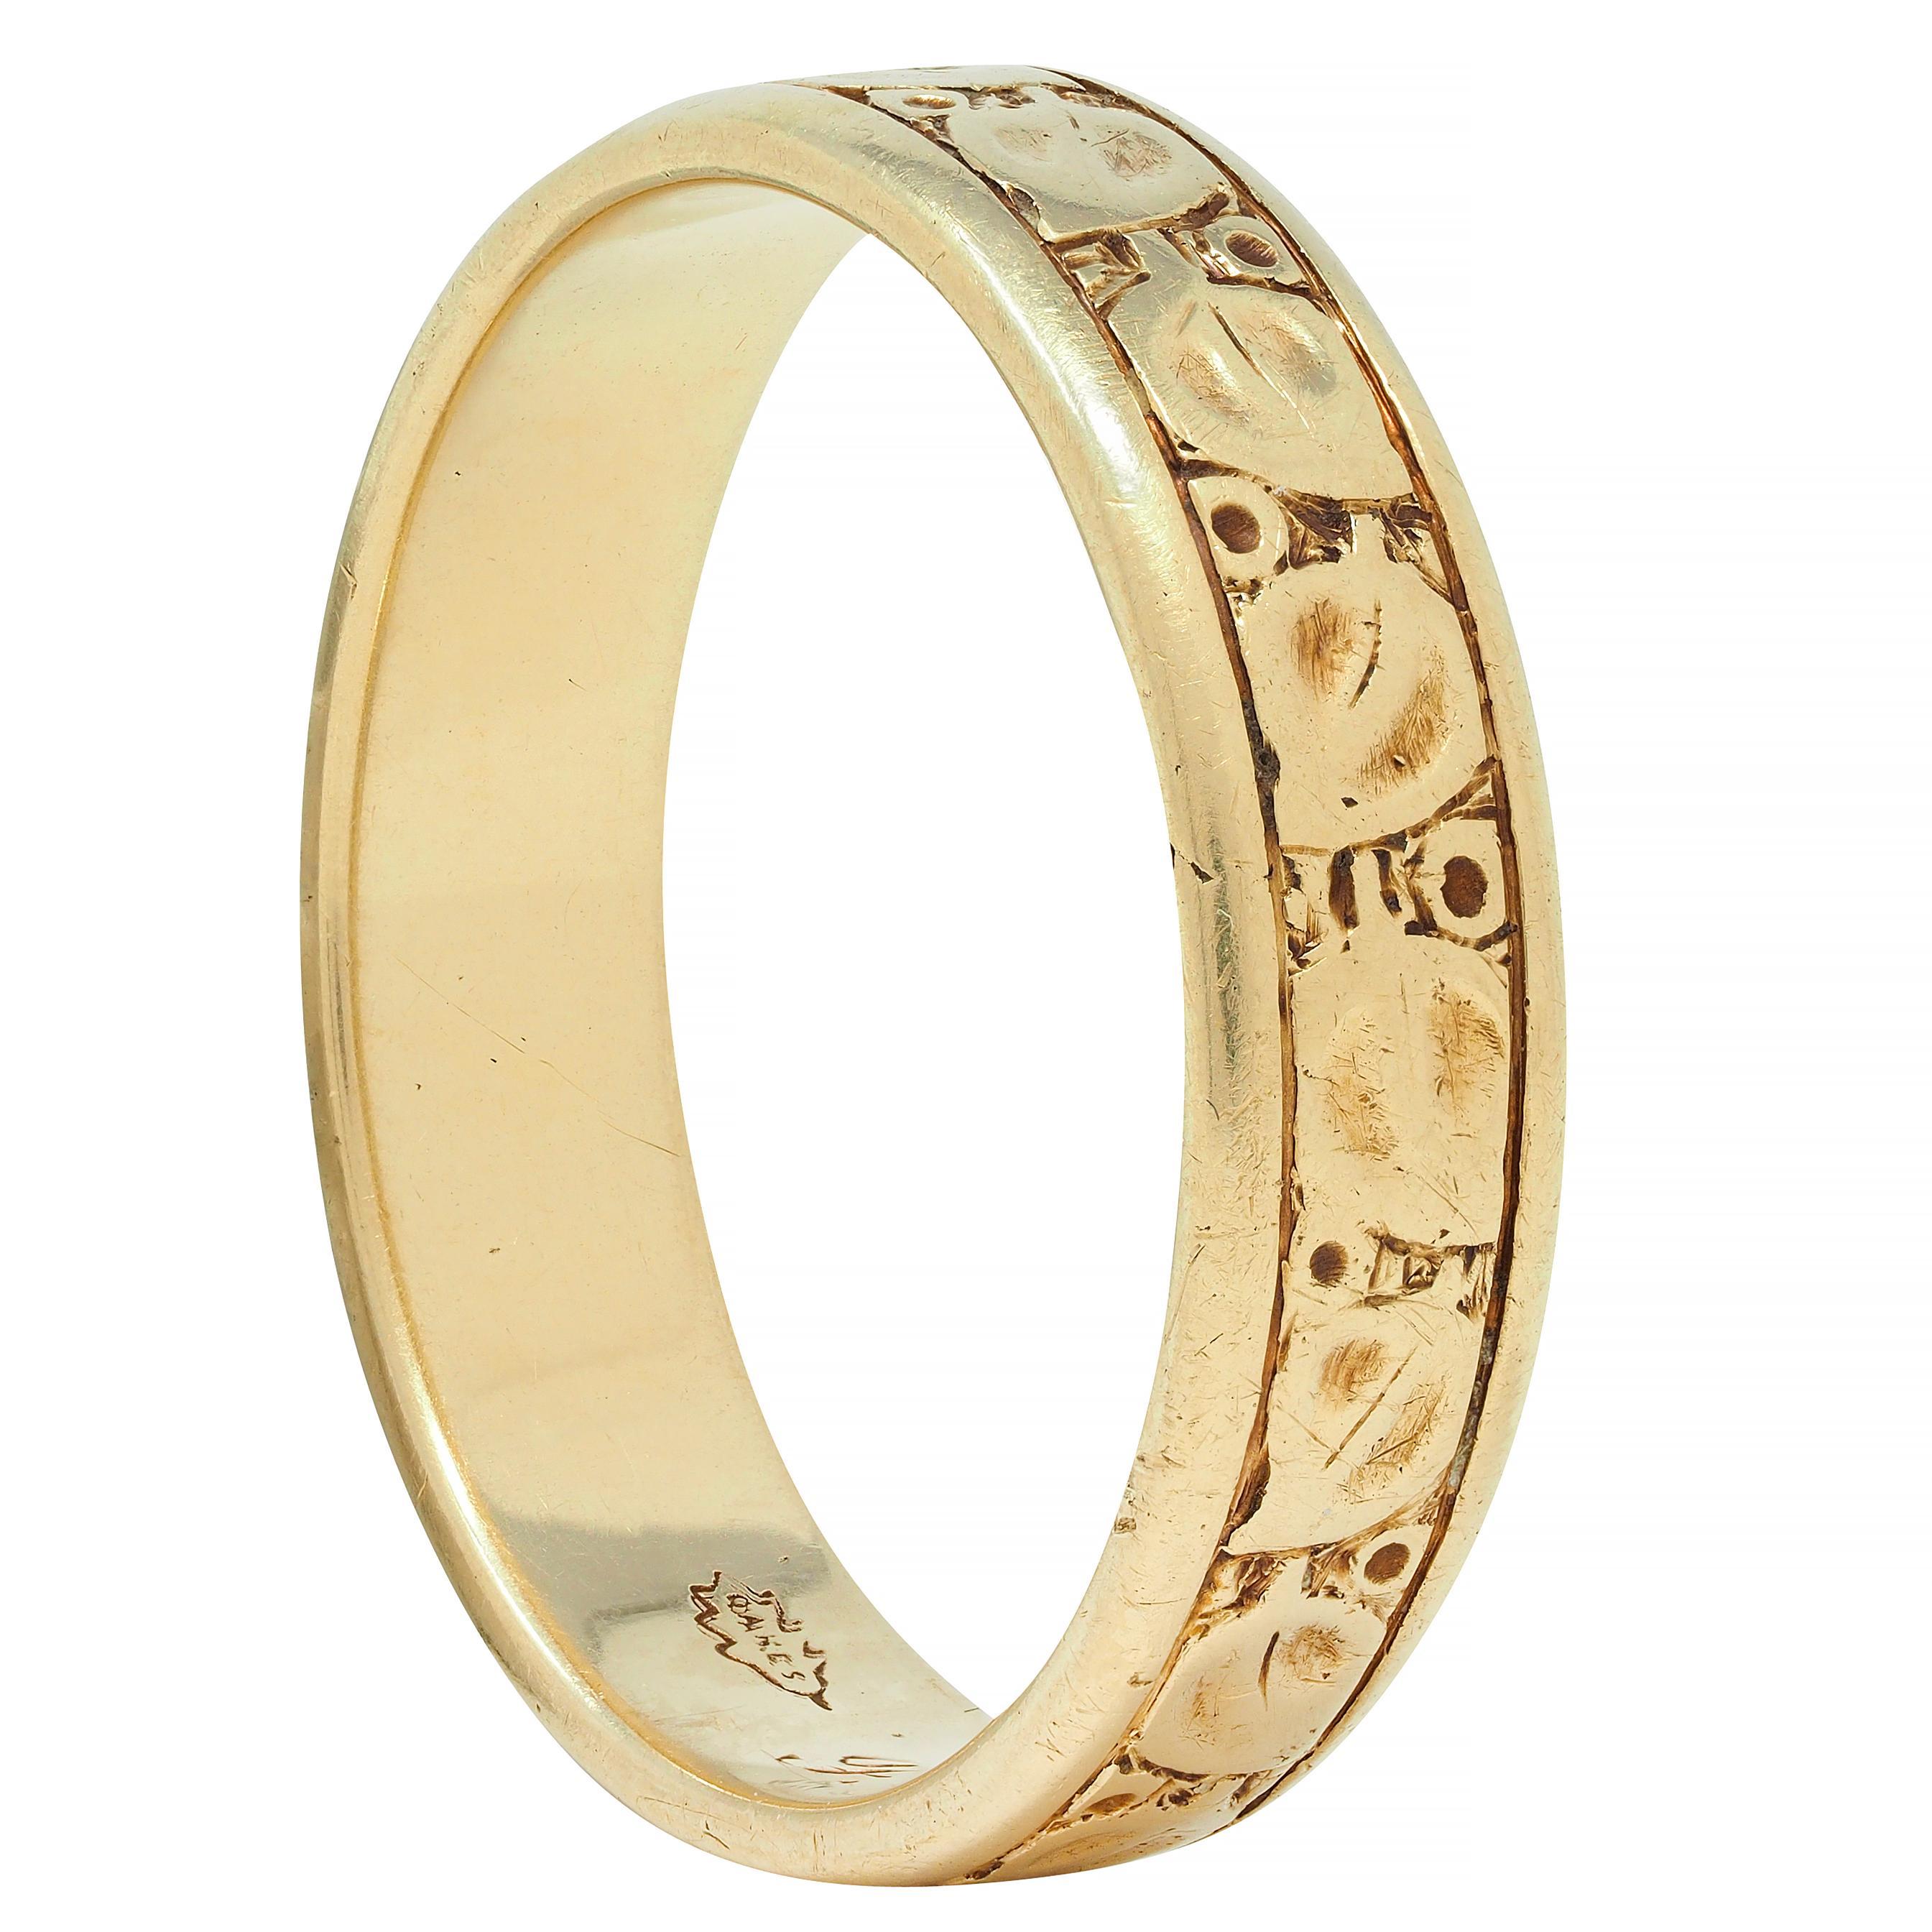 Designed as a gold band with rounded edges and an engraved foliate motif
Featuring meandering leaves and spots 
With grooved edges
Inscribed 'F.E.M and E.F.H 1896-1946' 
Tested as 14 karat gold
With maker's mark for E.E. Oakes 
Circa: 1946; via